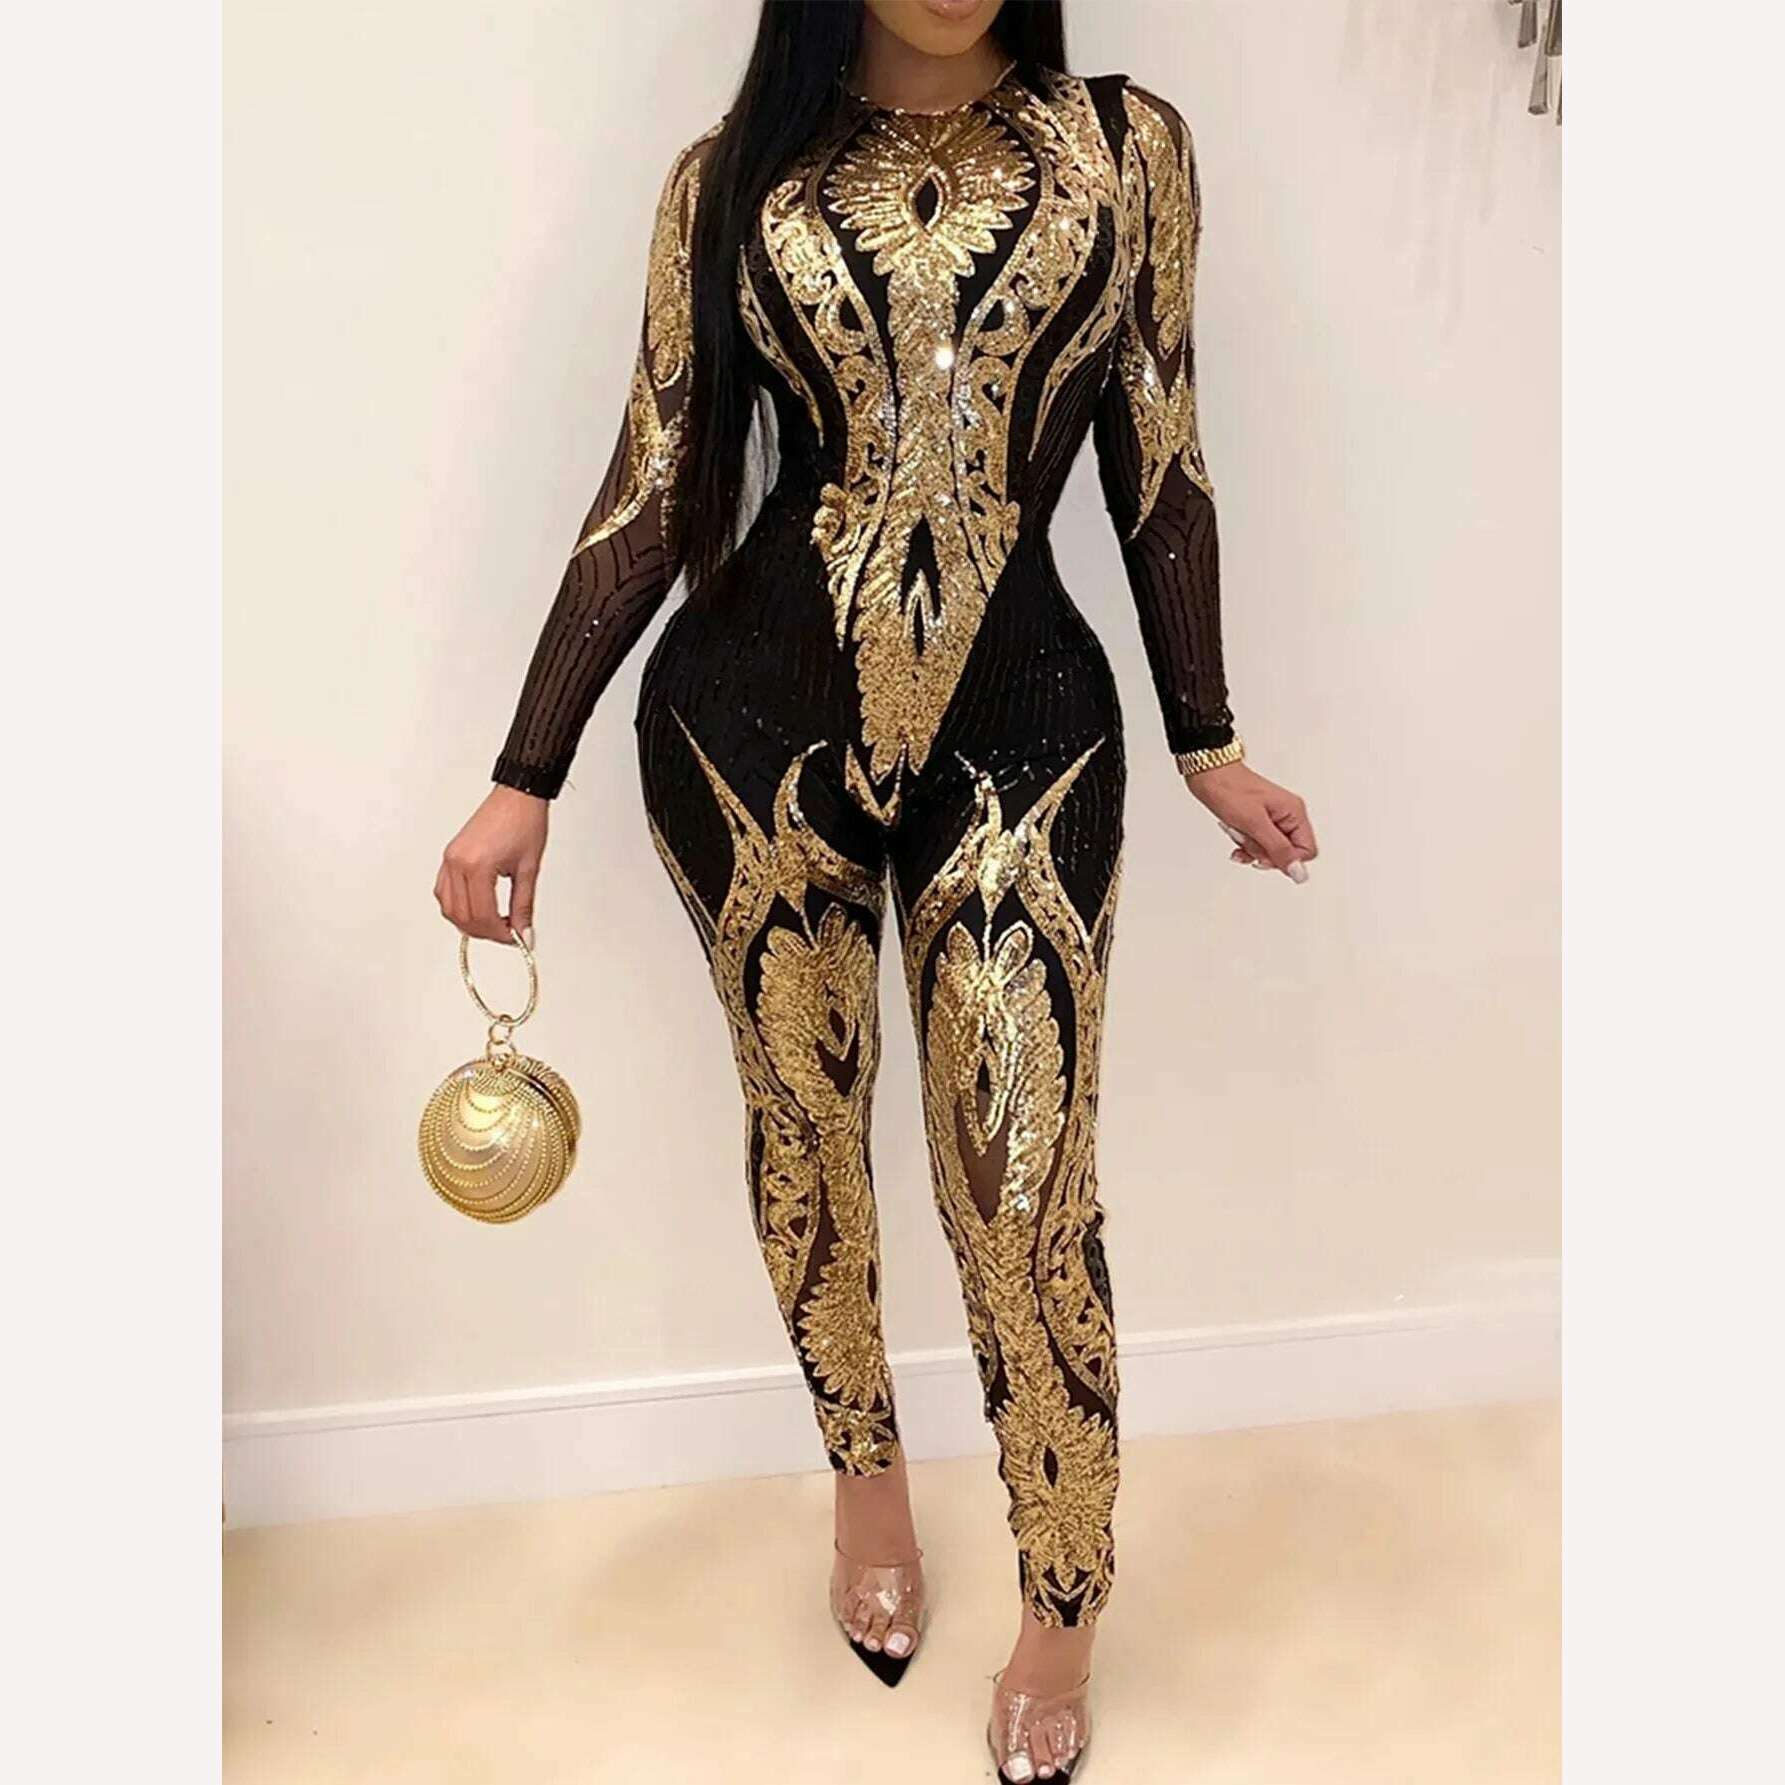 KIMLUD, Sexy Long sleeve Sequin bodycon jumpsuit women body bodysuit one piece birthday party nightclub outfits womens jumpsuits overall, KIMLUD Women's Clothes